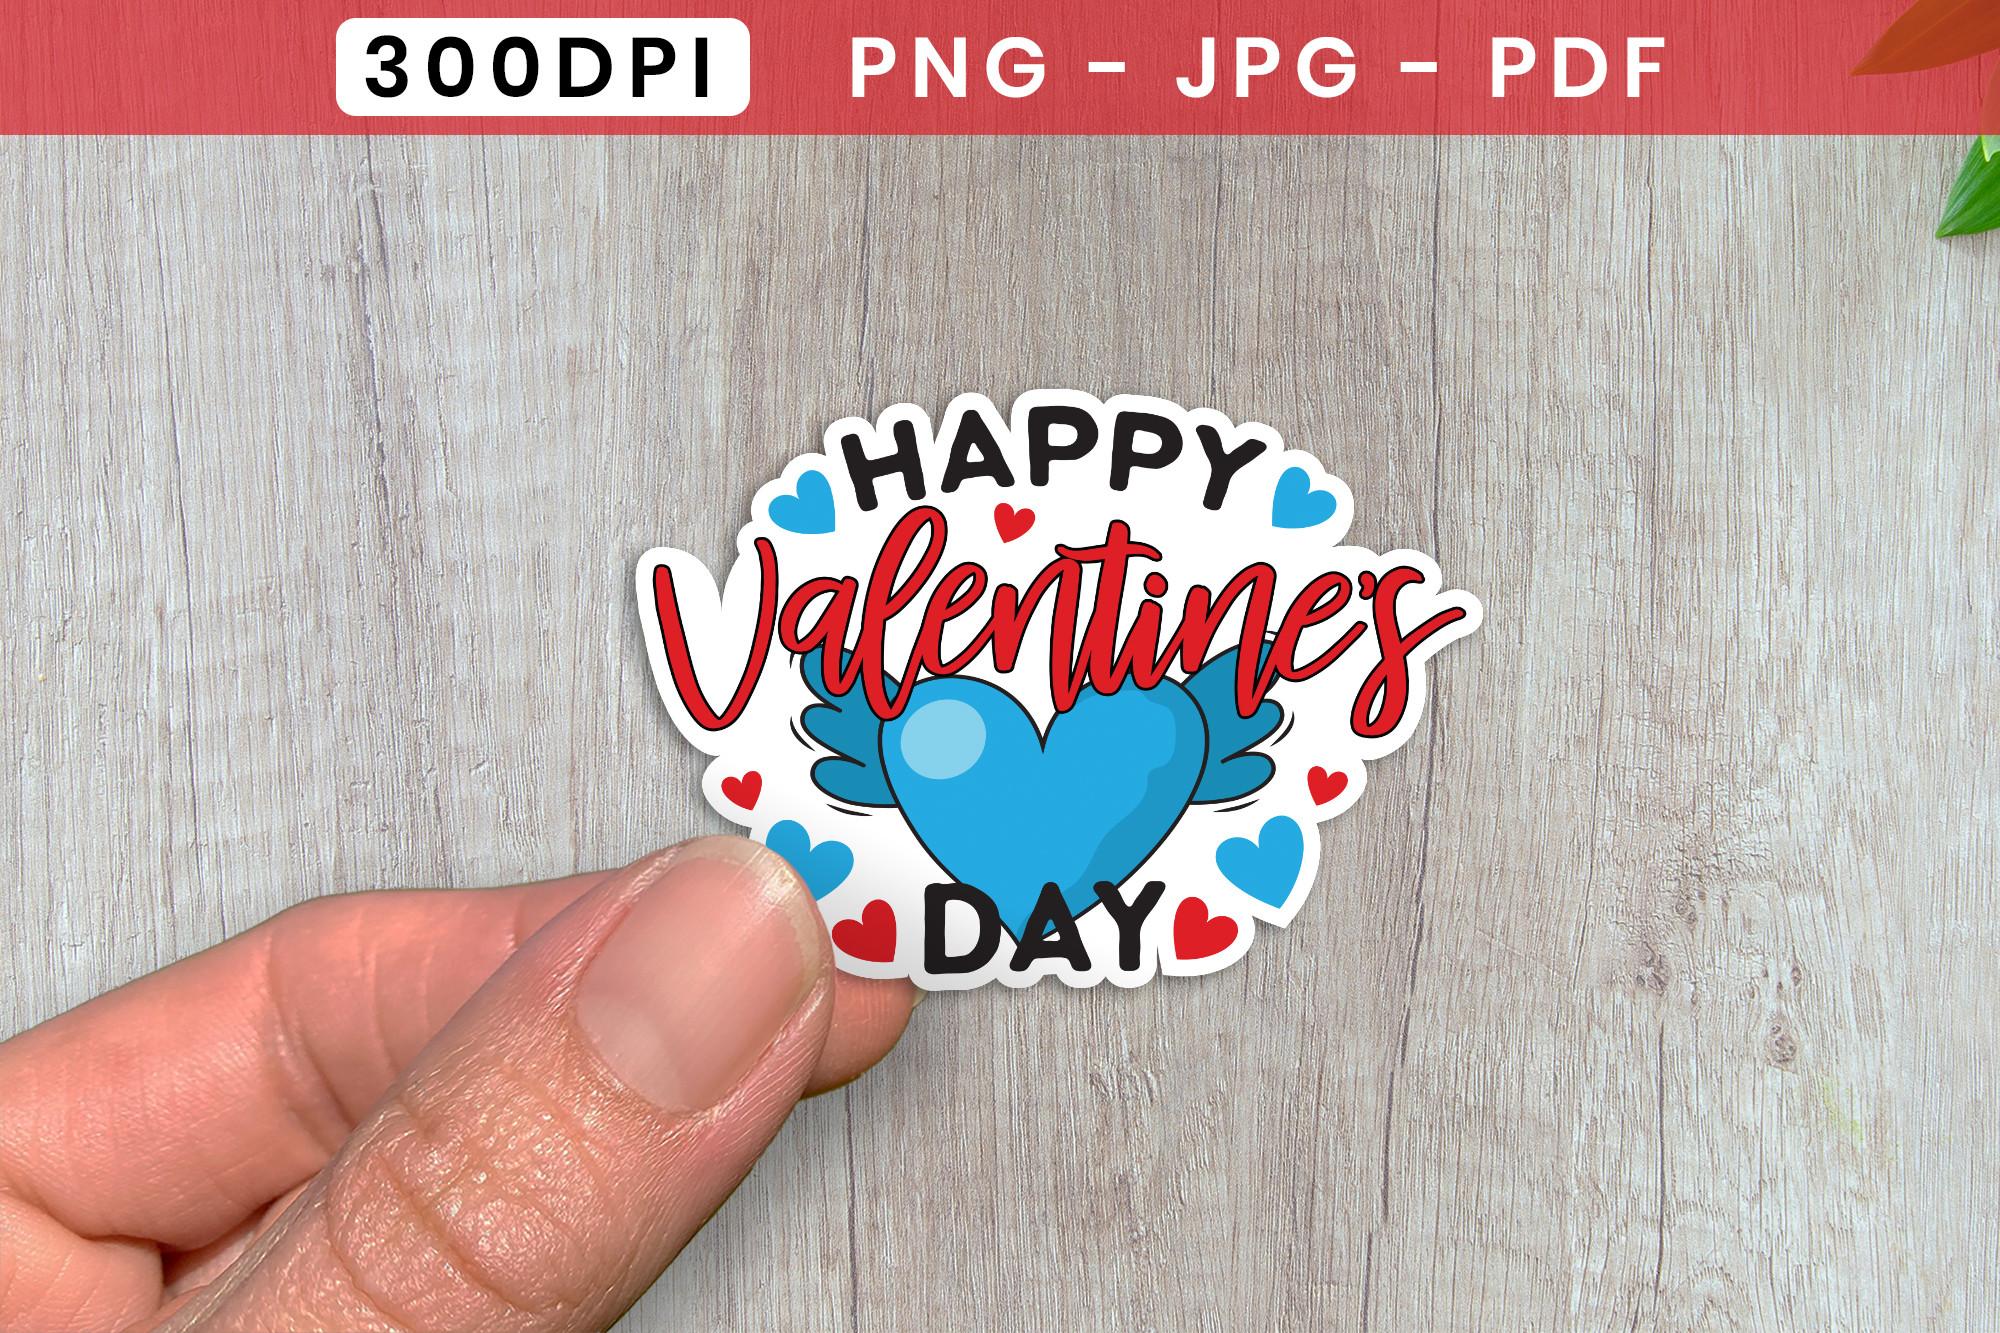 Happy Valentine's Day PNG, Sticker PNG